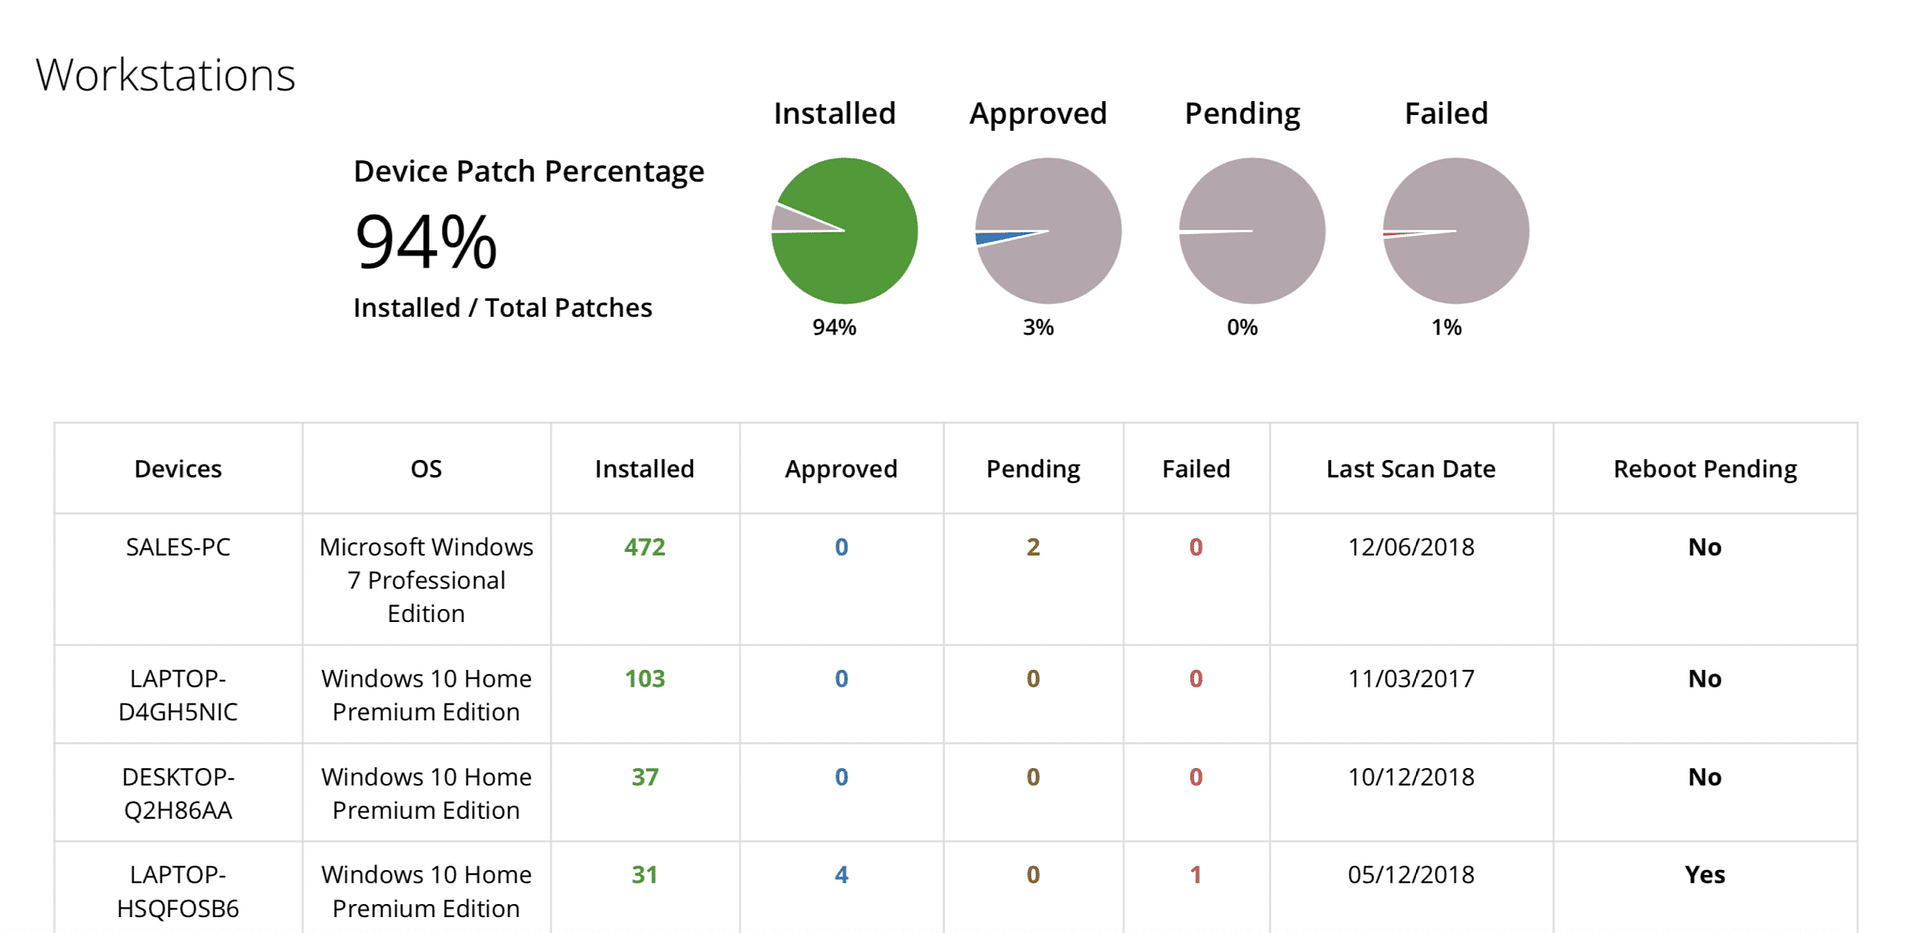 patch audit reporting dashboard with details for workstations